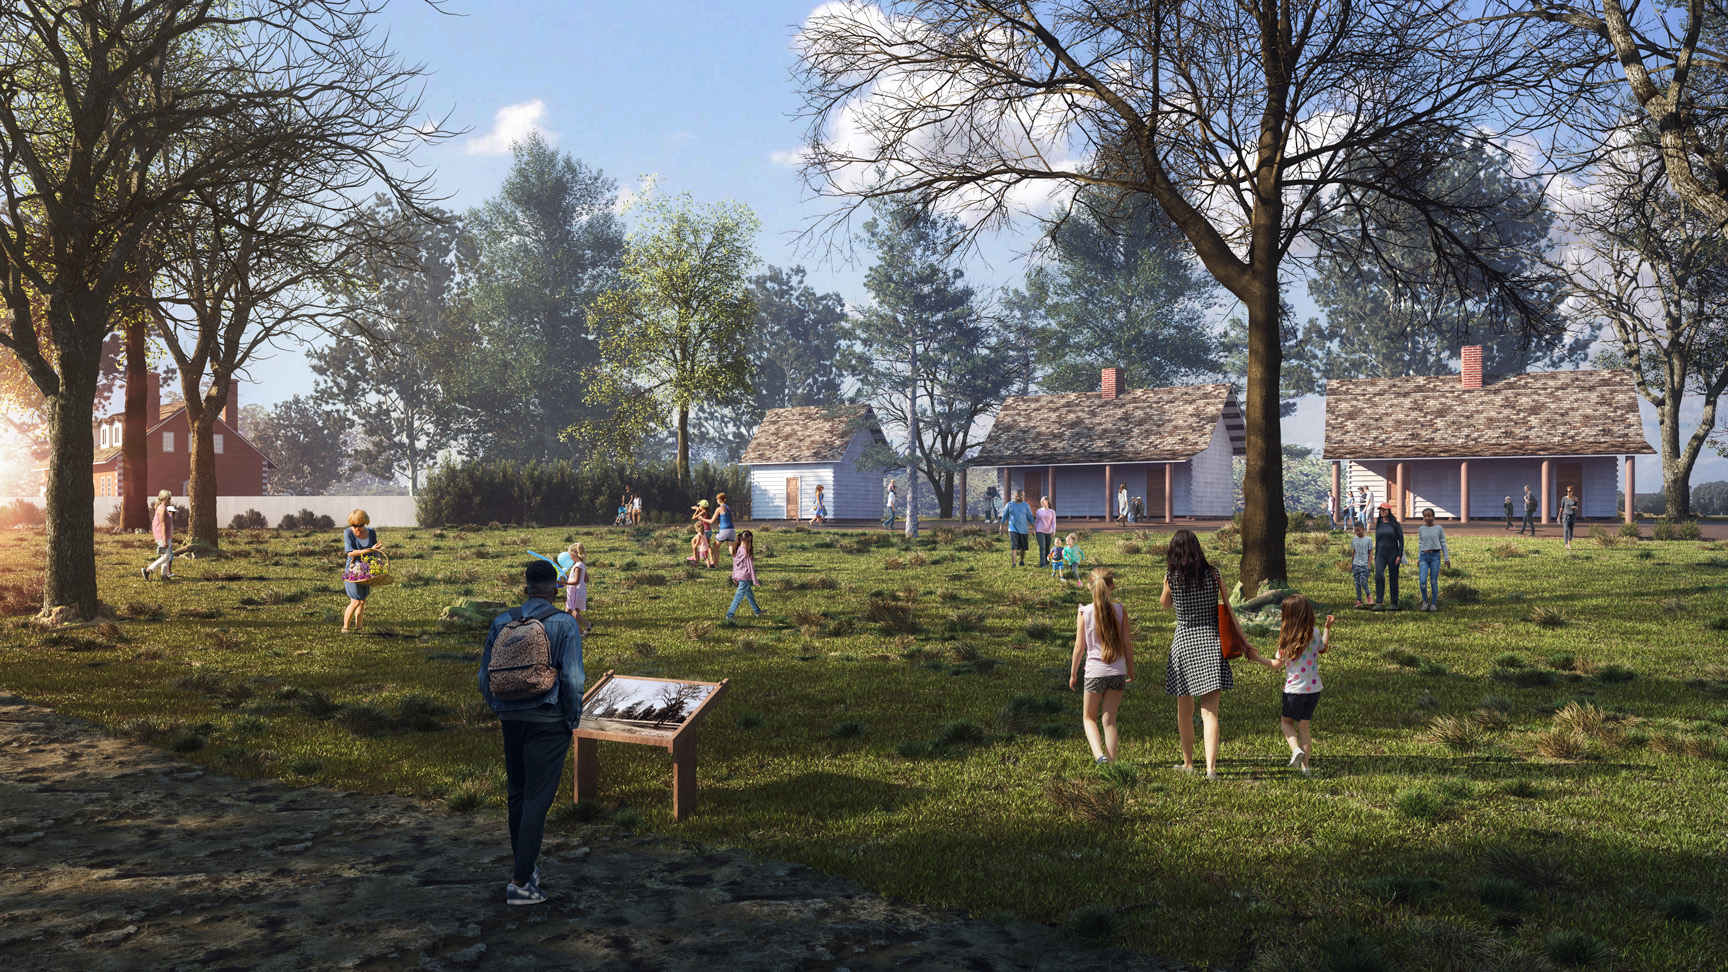 A rendering of the East Yard project. Three small houses where the enslaved people would have lived are shown, along with people walking around the museum grounds to learn the history of Gunston Hall.